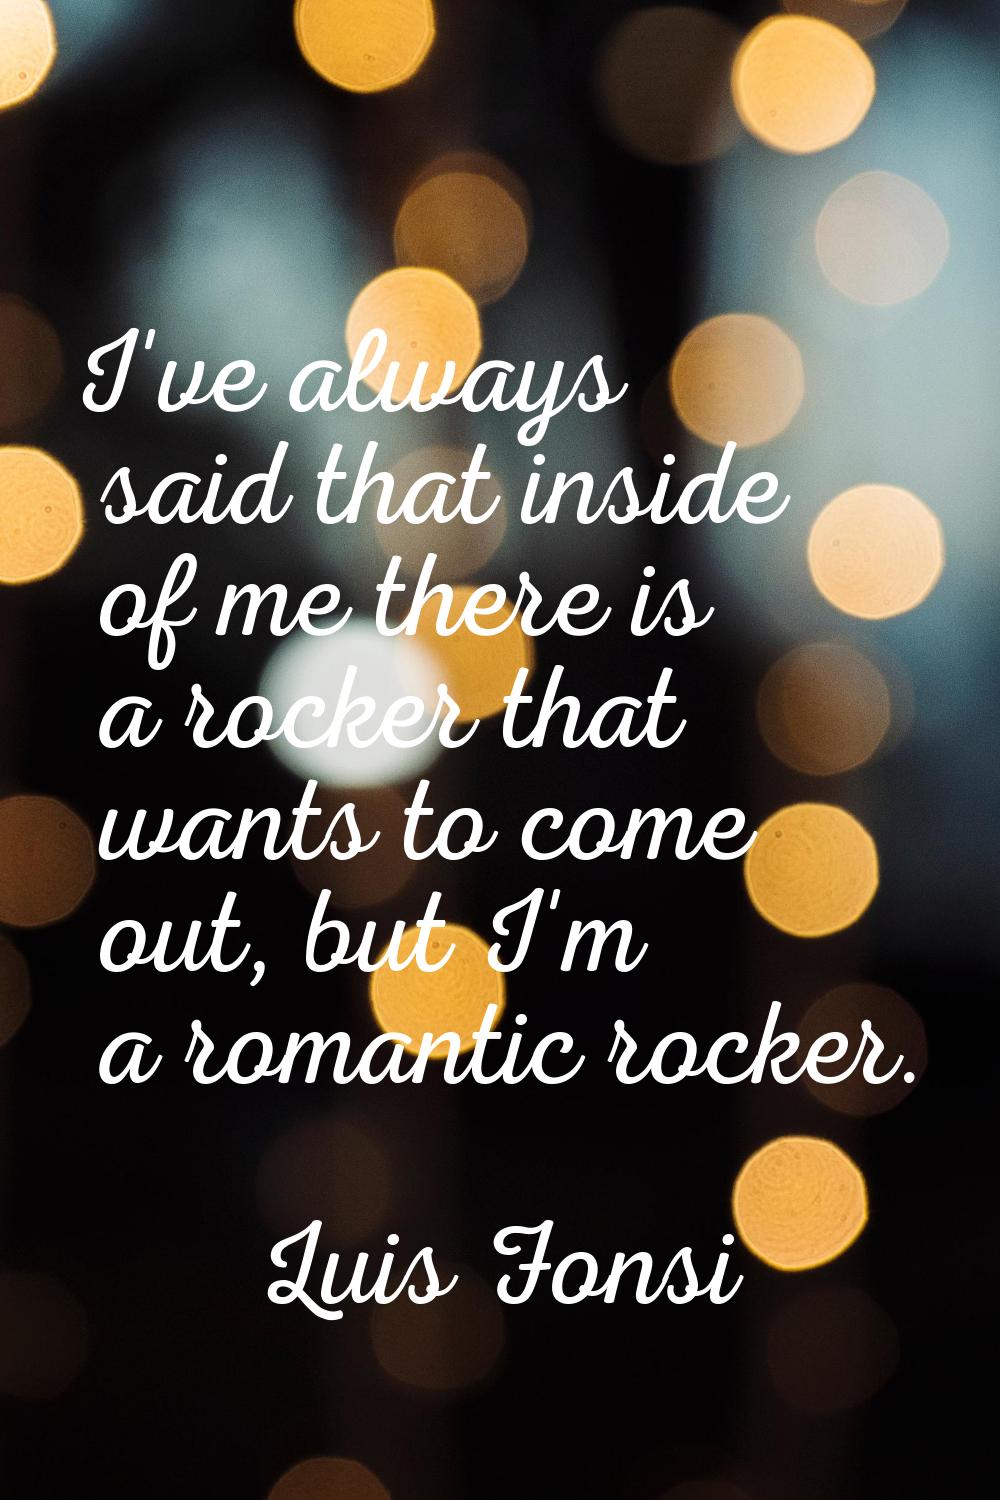 I've always said that inside of me there is a rocker that wants to come out, but I'm a romantic roc